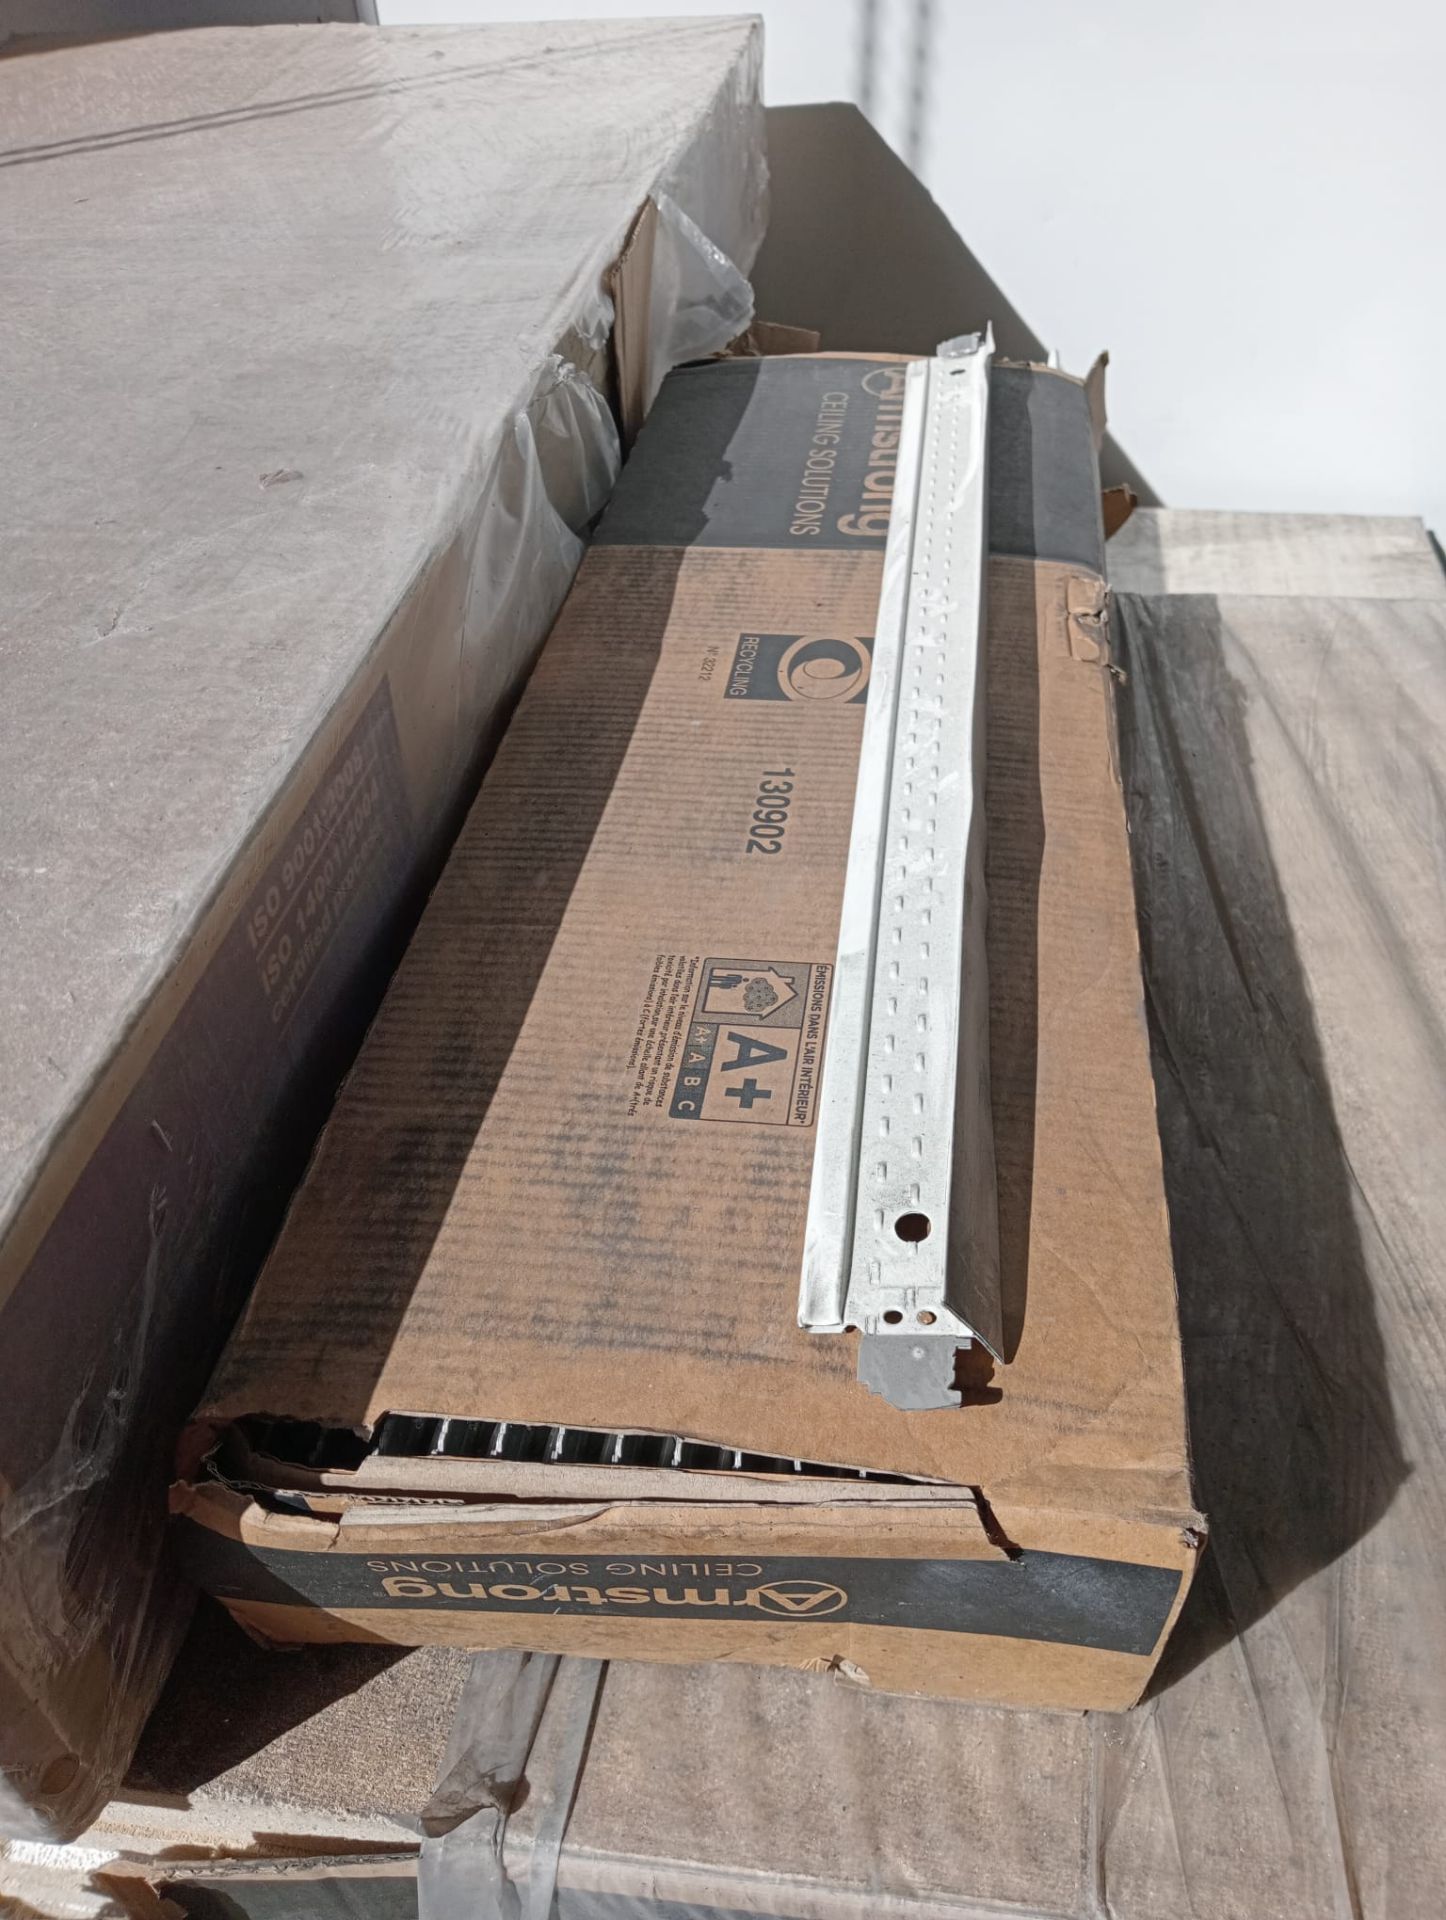 JOBLOT OF ARMSTRONG ACOUSTIC CEILING TILES INC 5461, 9120 AND 2539 - GRADE B - Image 7 of 7